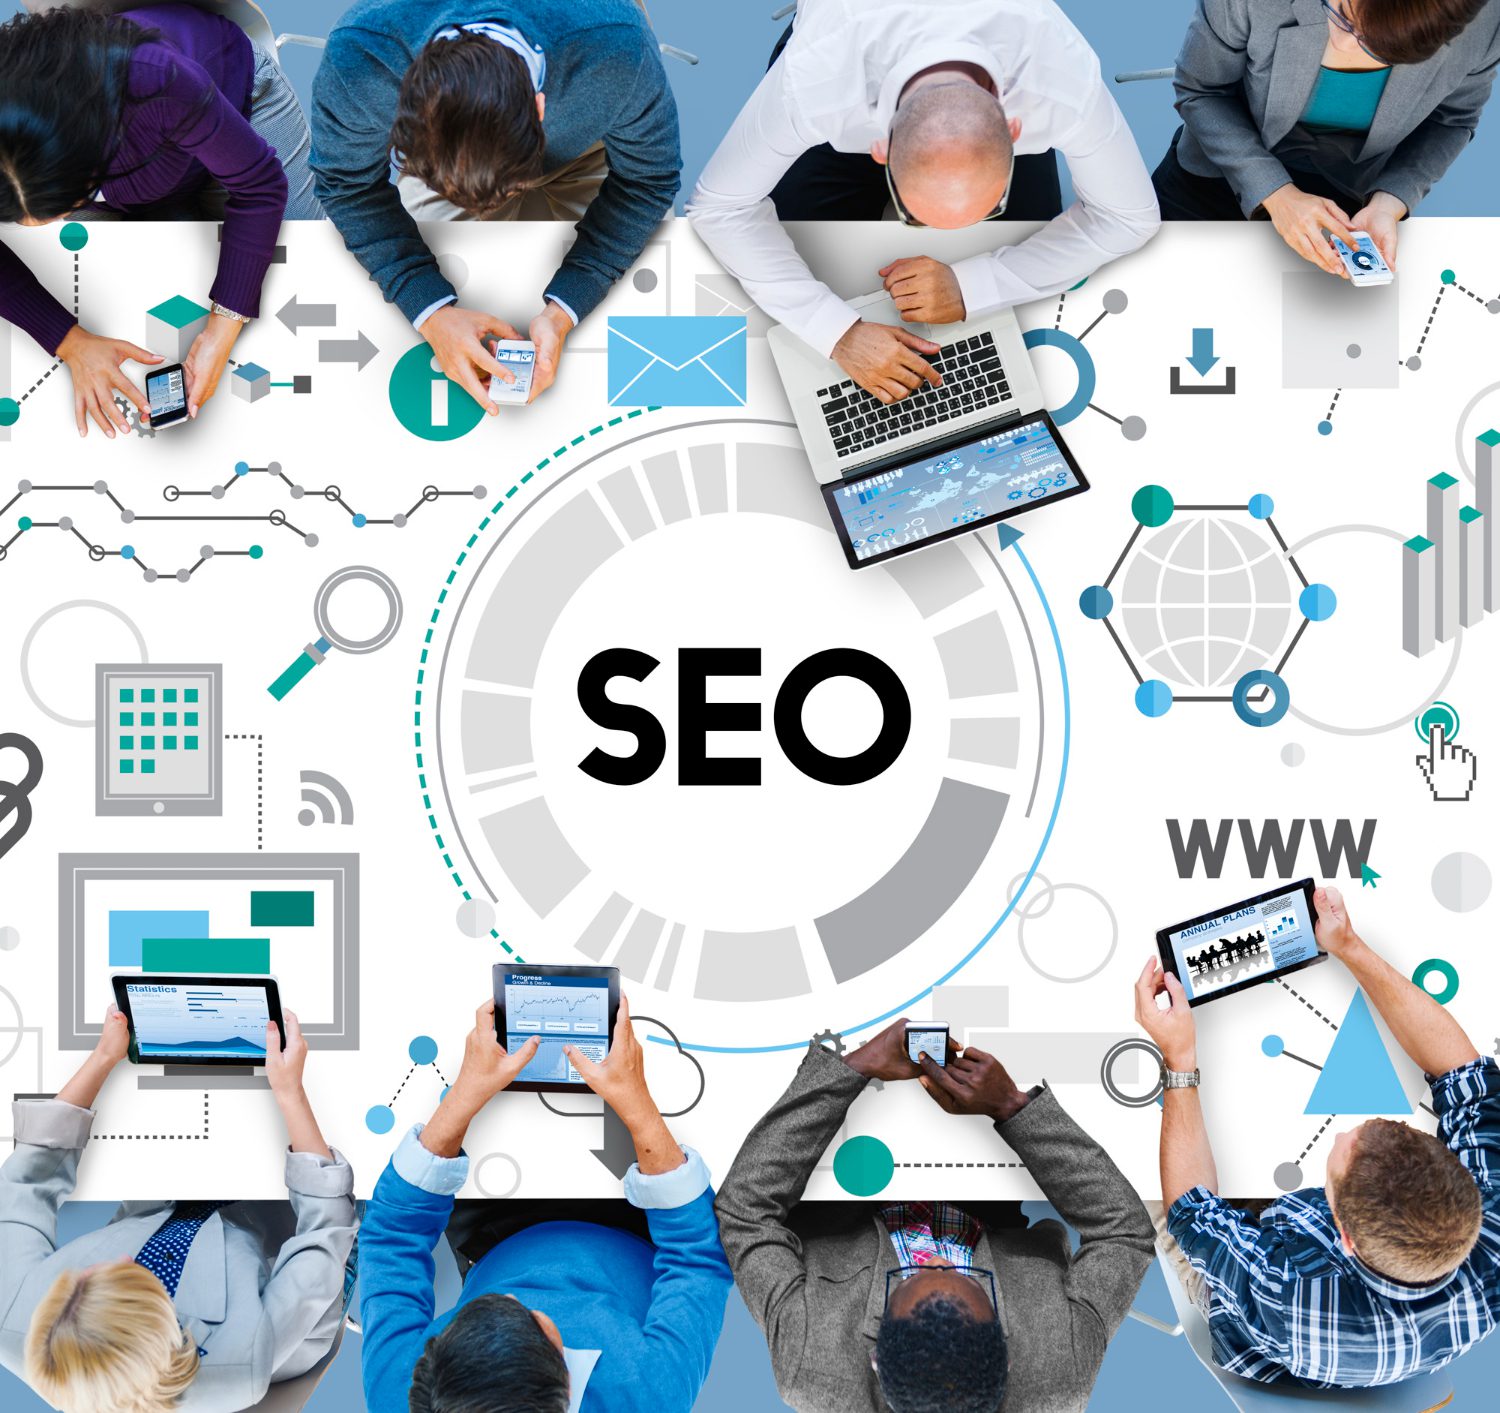 searching-engine-optimizing-seo-browsing-concept